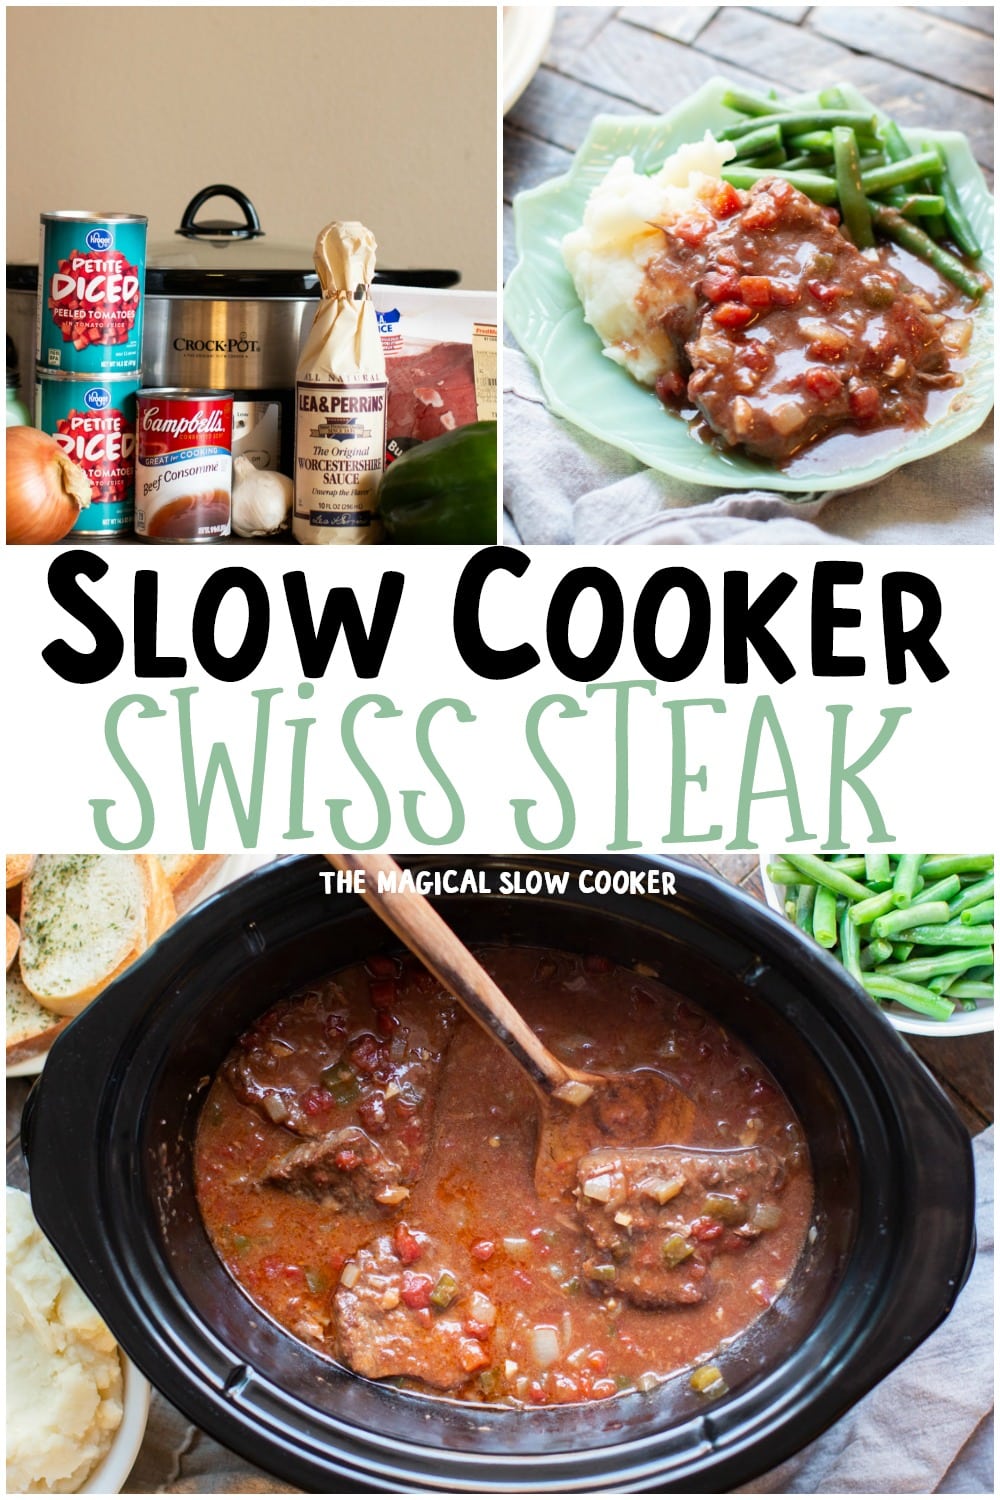 Slow Cooker Swiss Steak - The Magical Slow Cooker